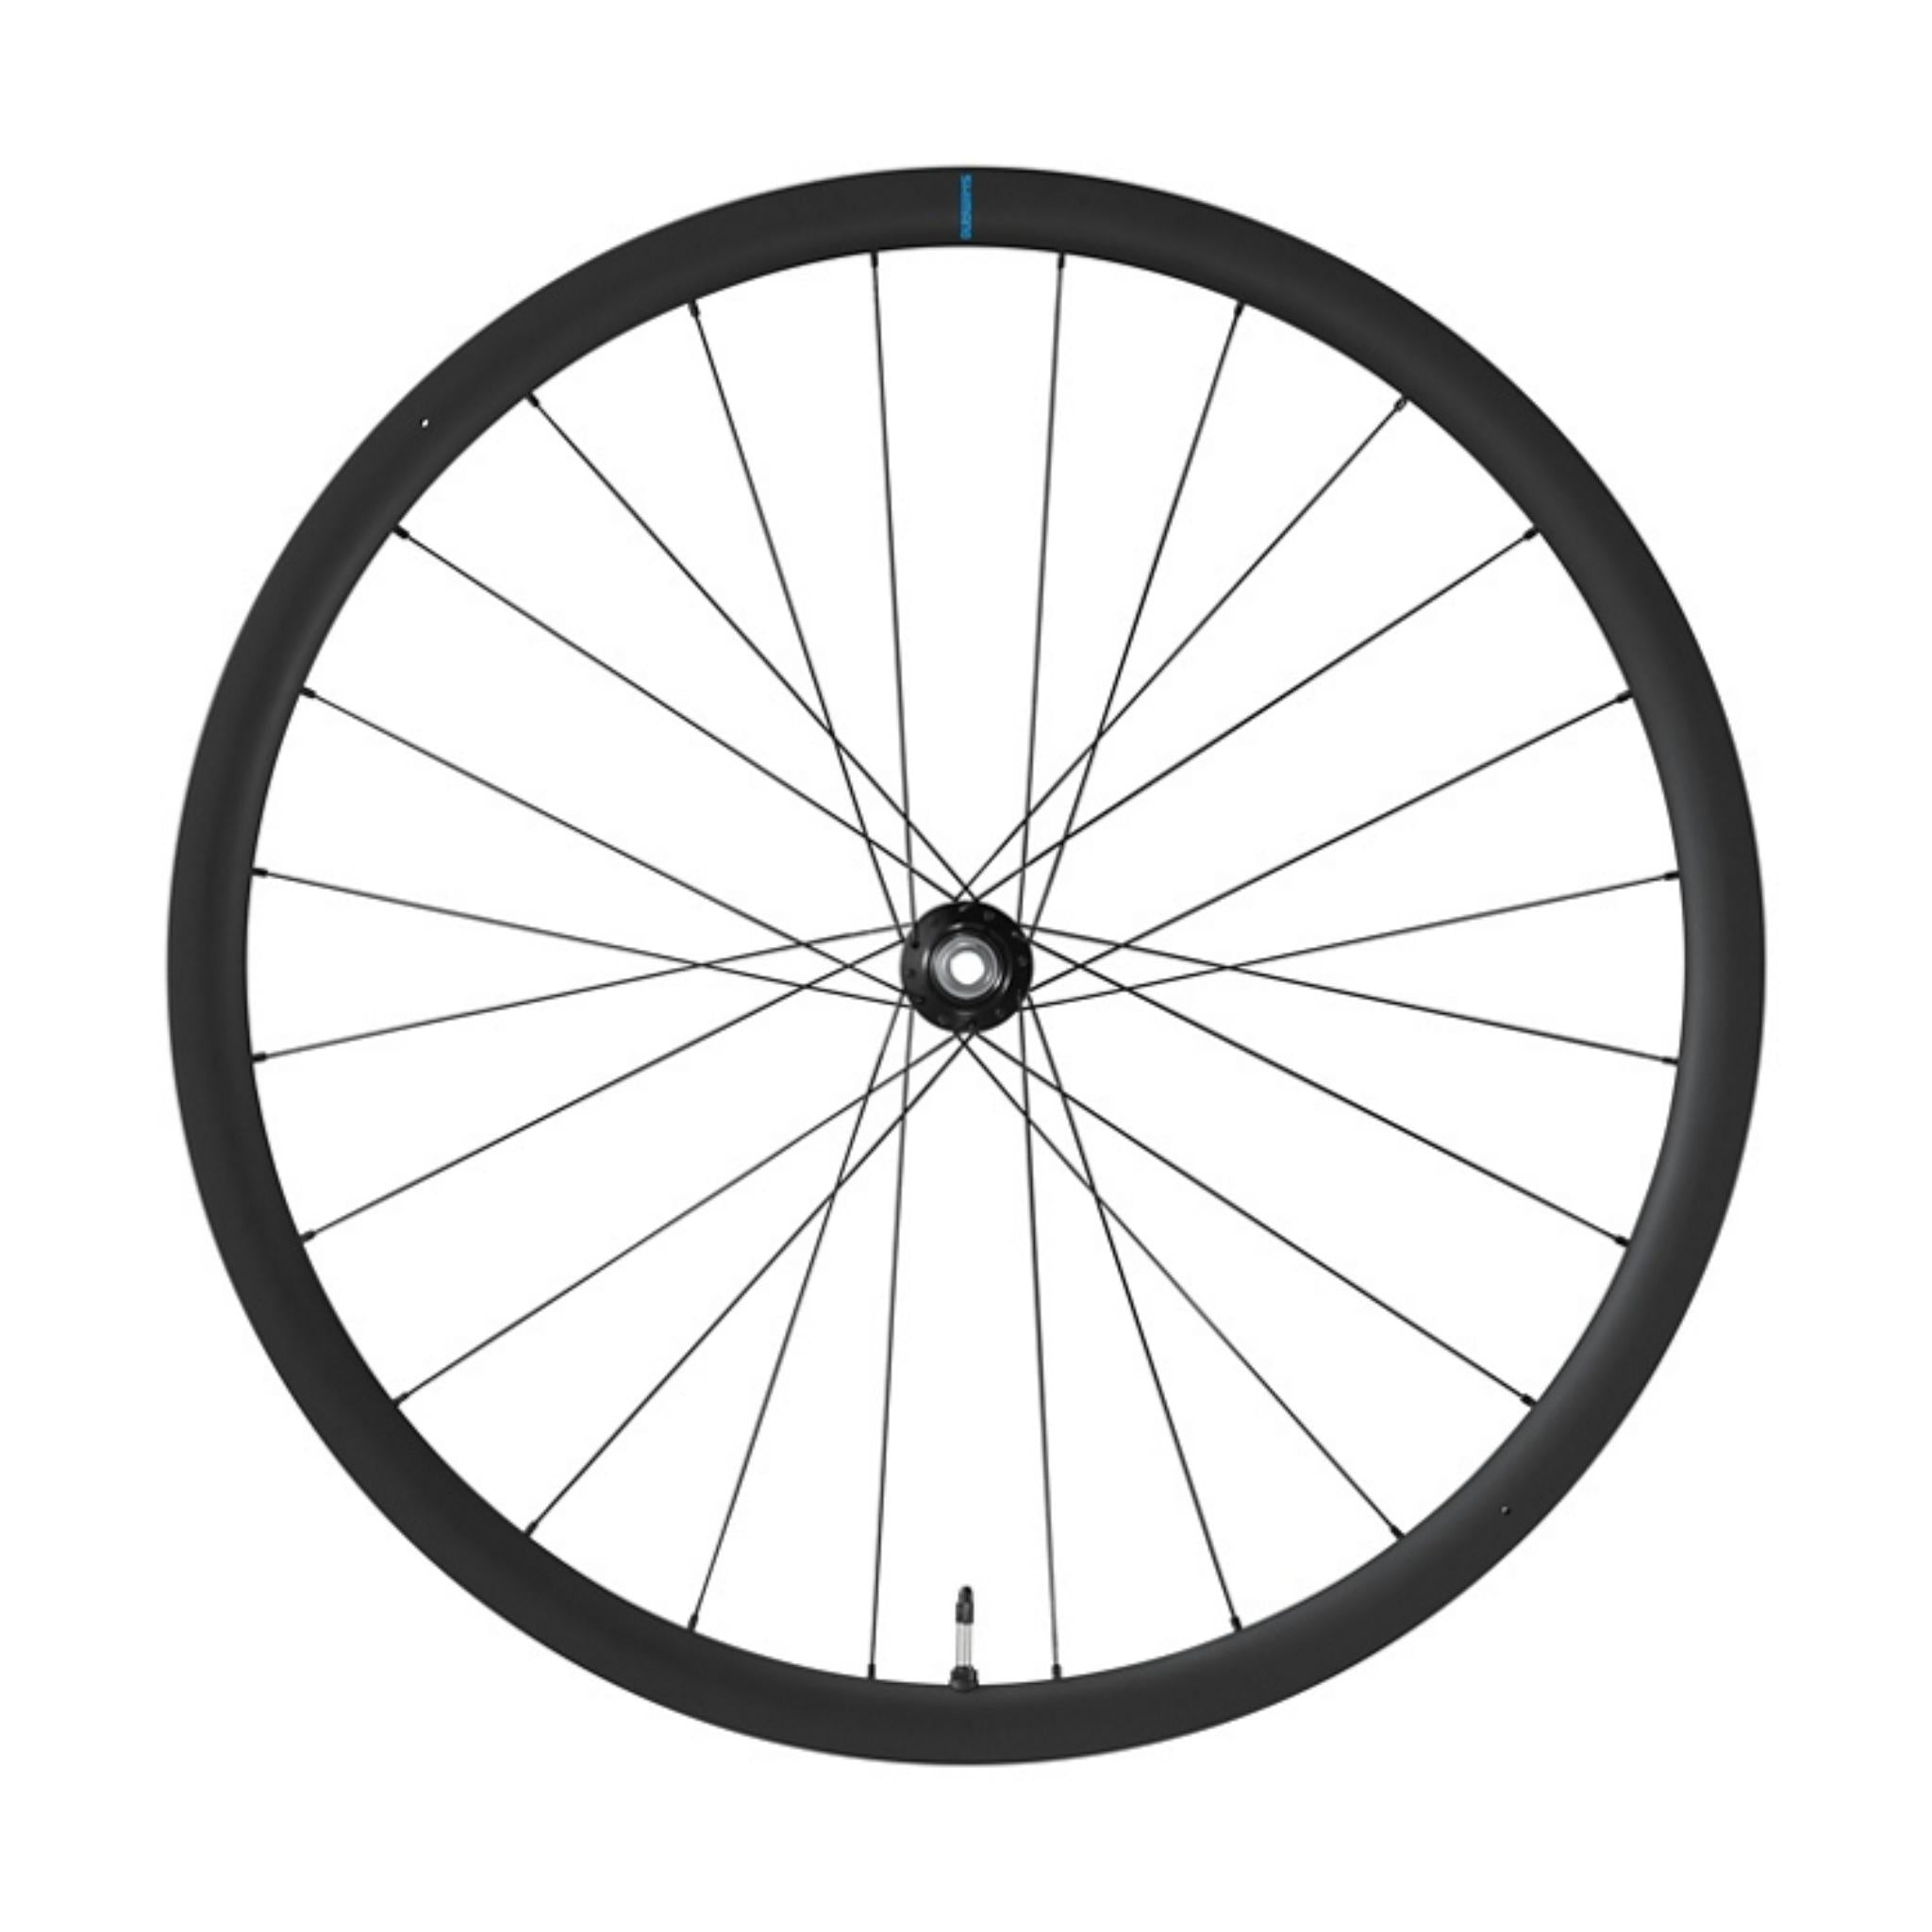 Shimano GRX WH-RX880 700C Carbon Front Wheel